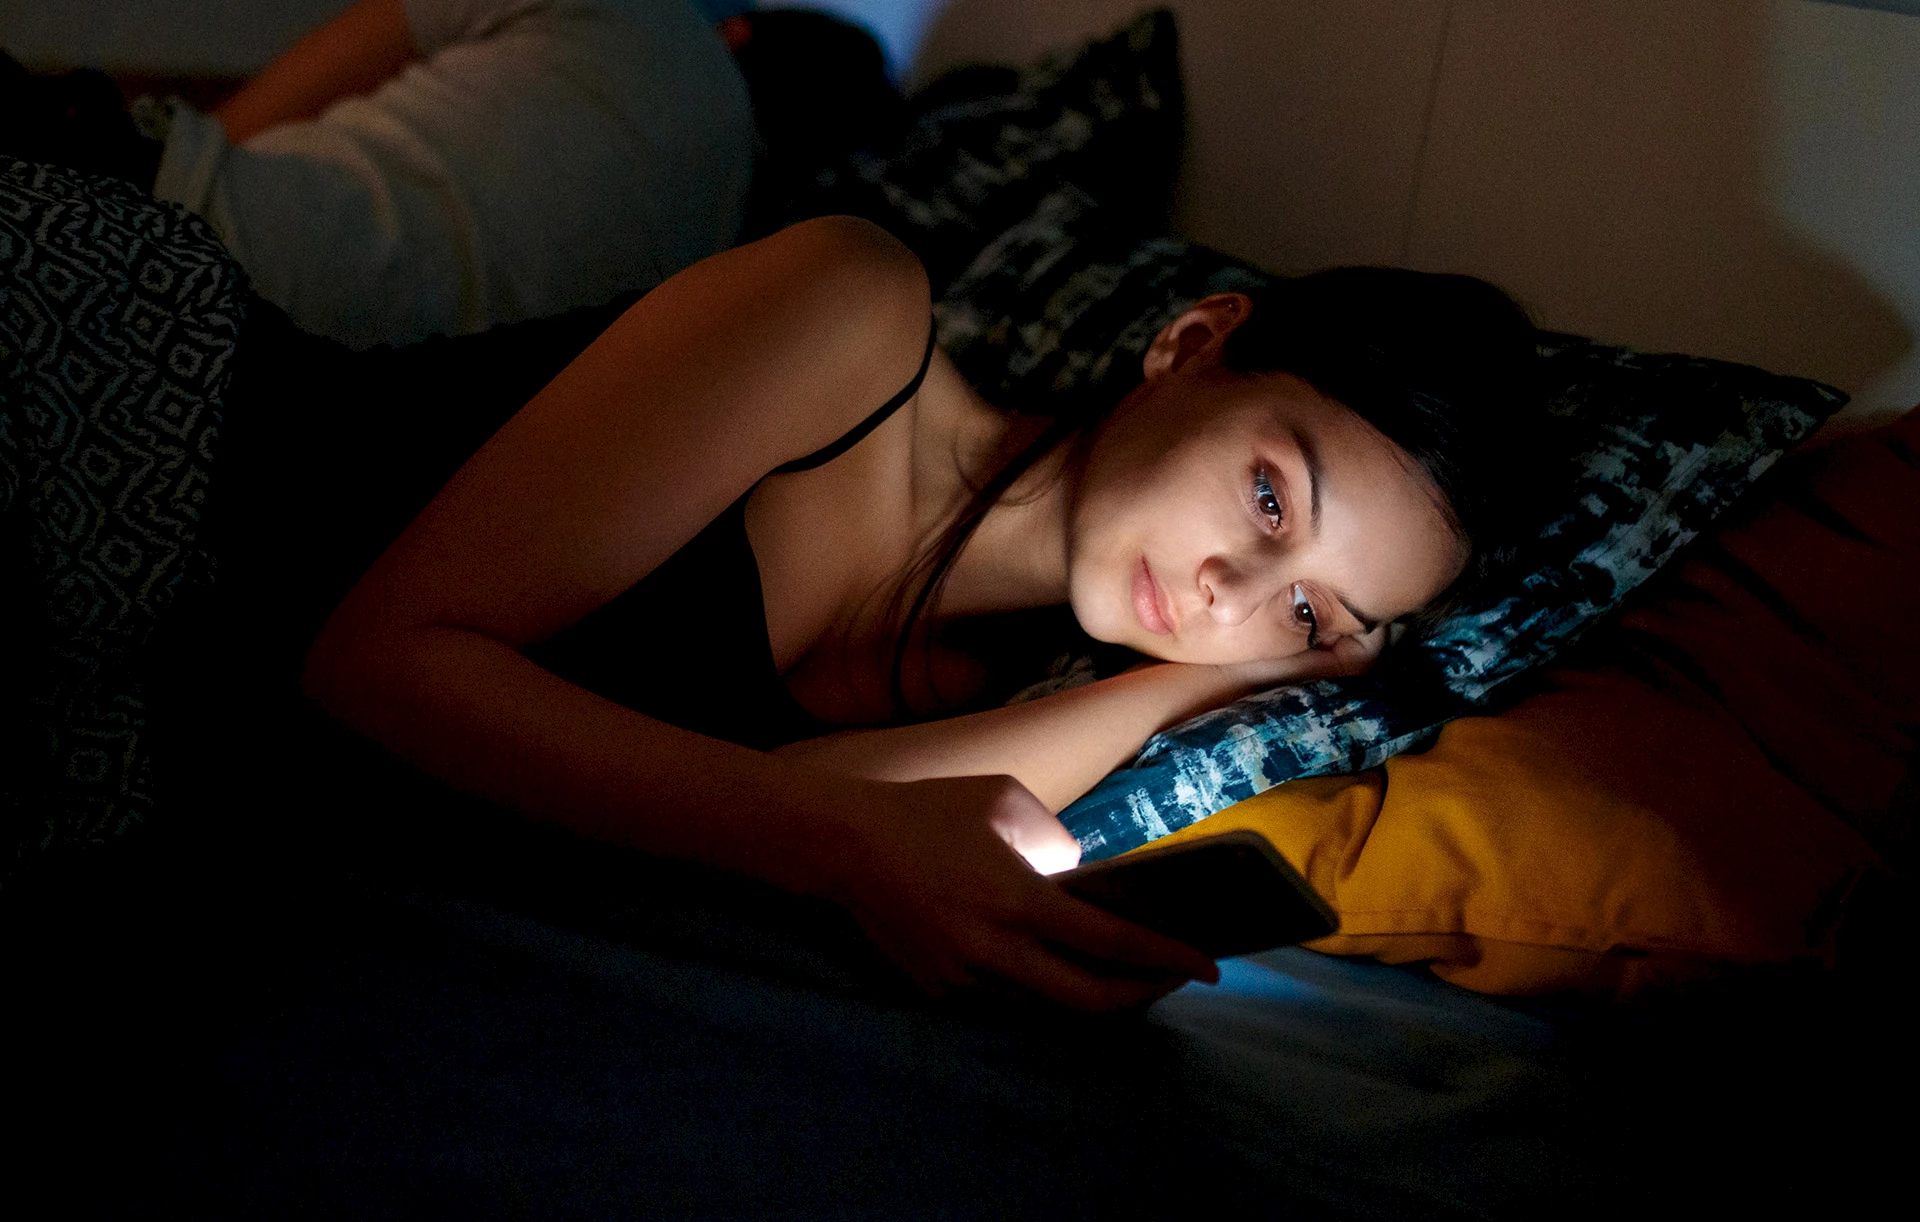 Woman checking her smartphone at bedtime.